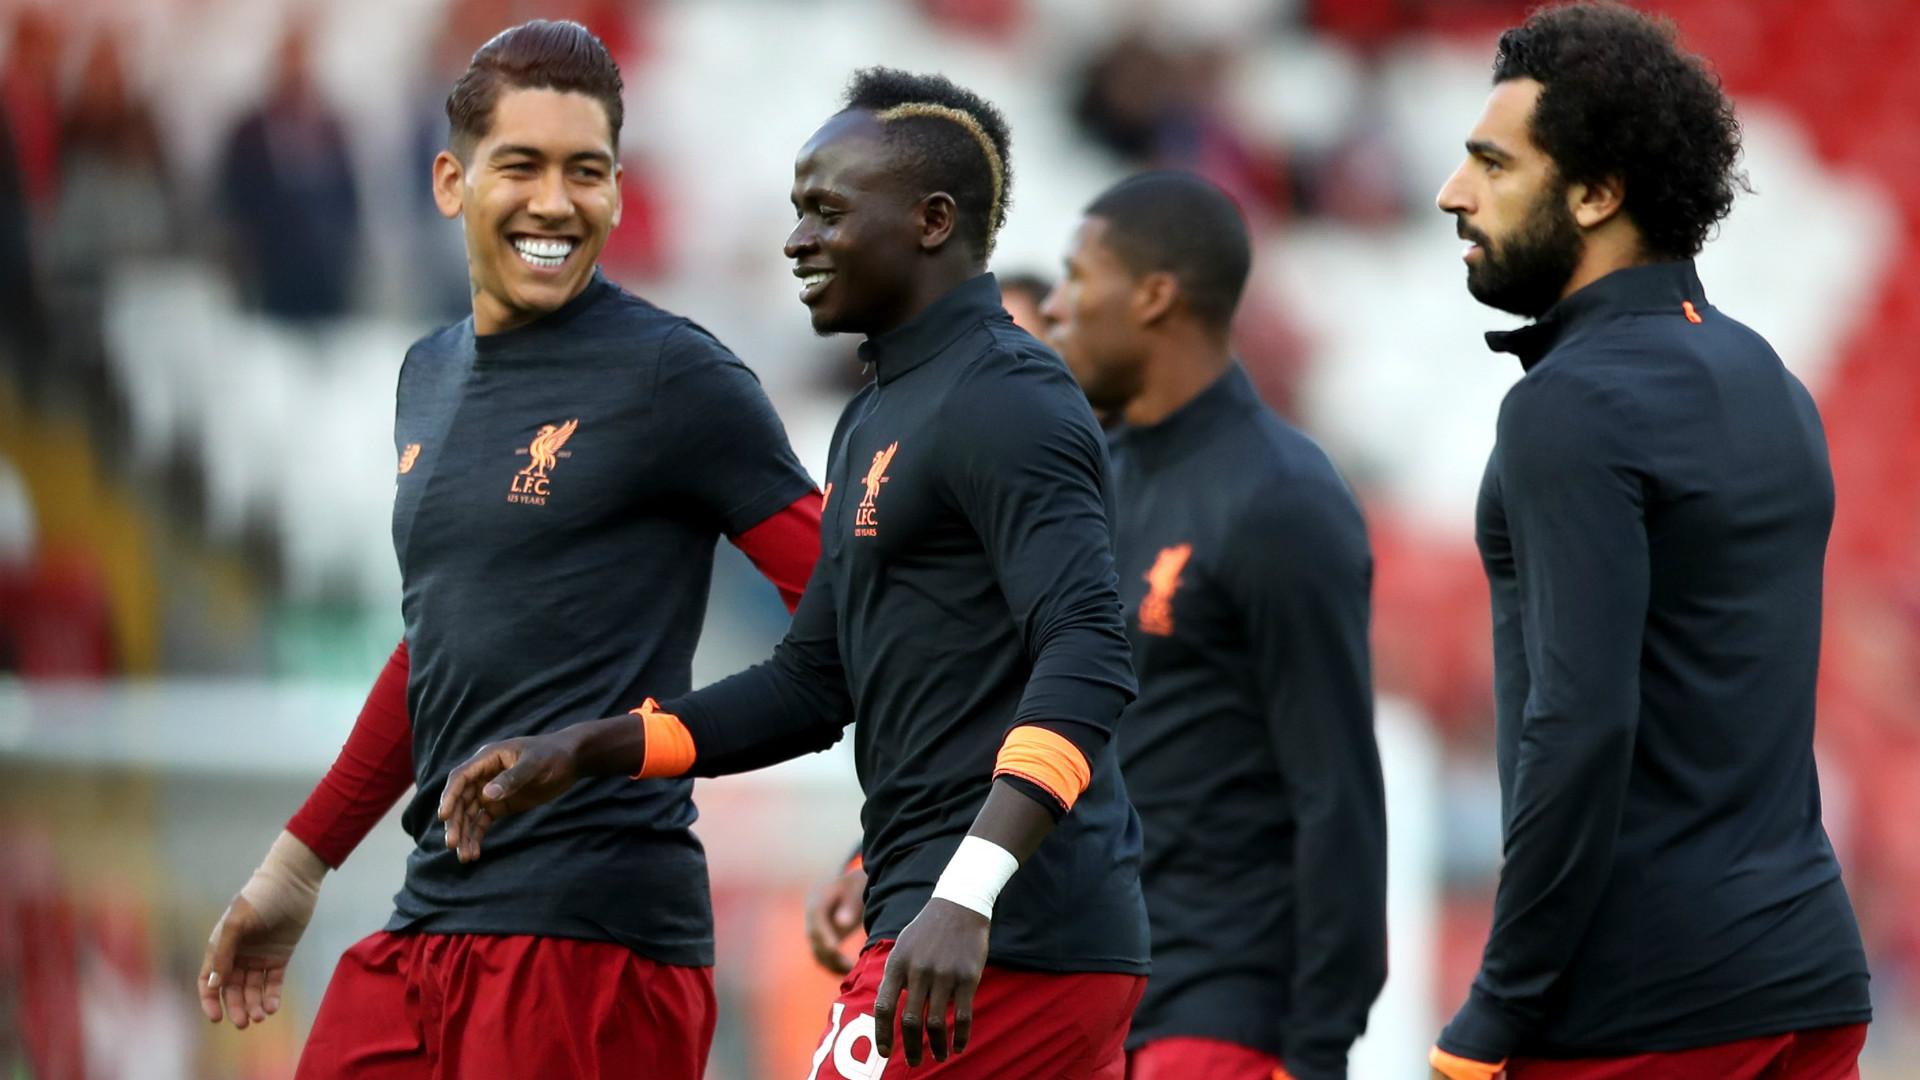 Sadio Mane reveals how Liverpool teammates made fun of him after